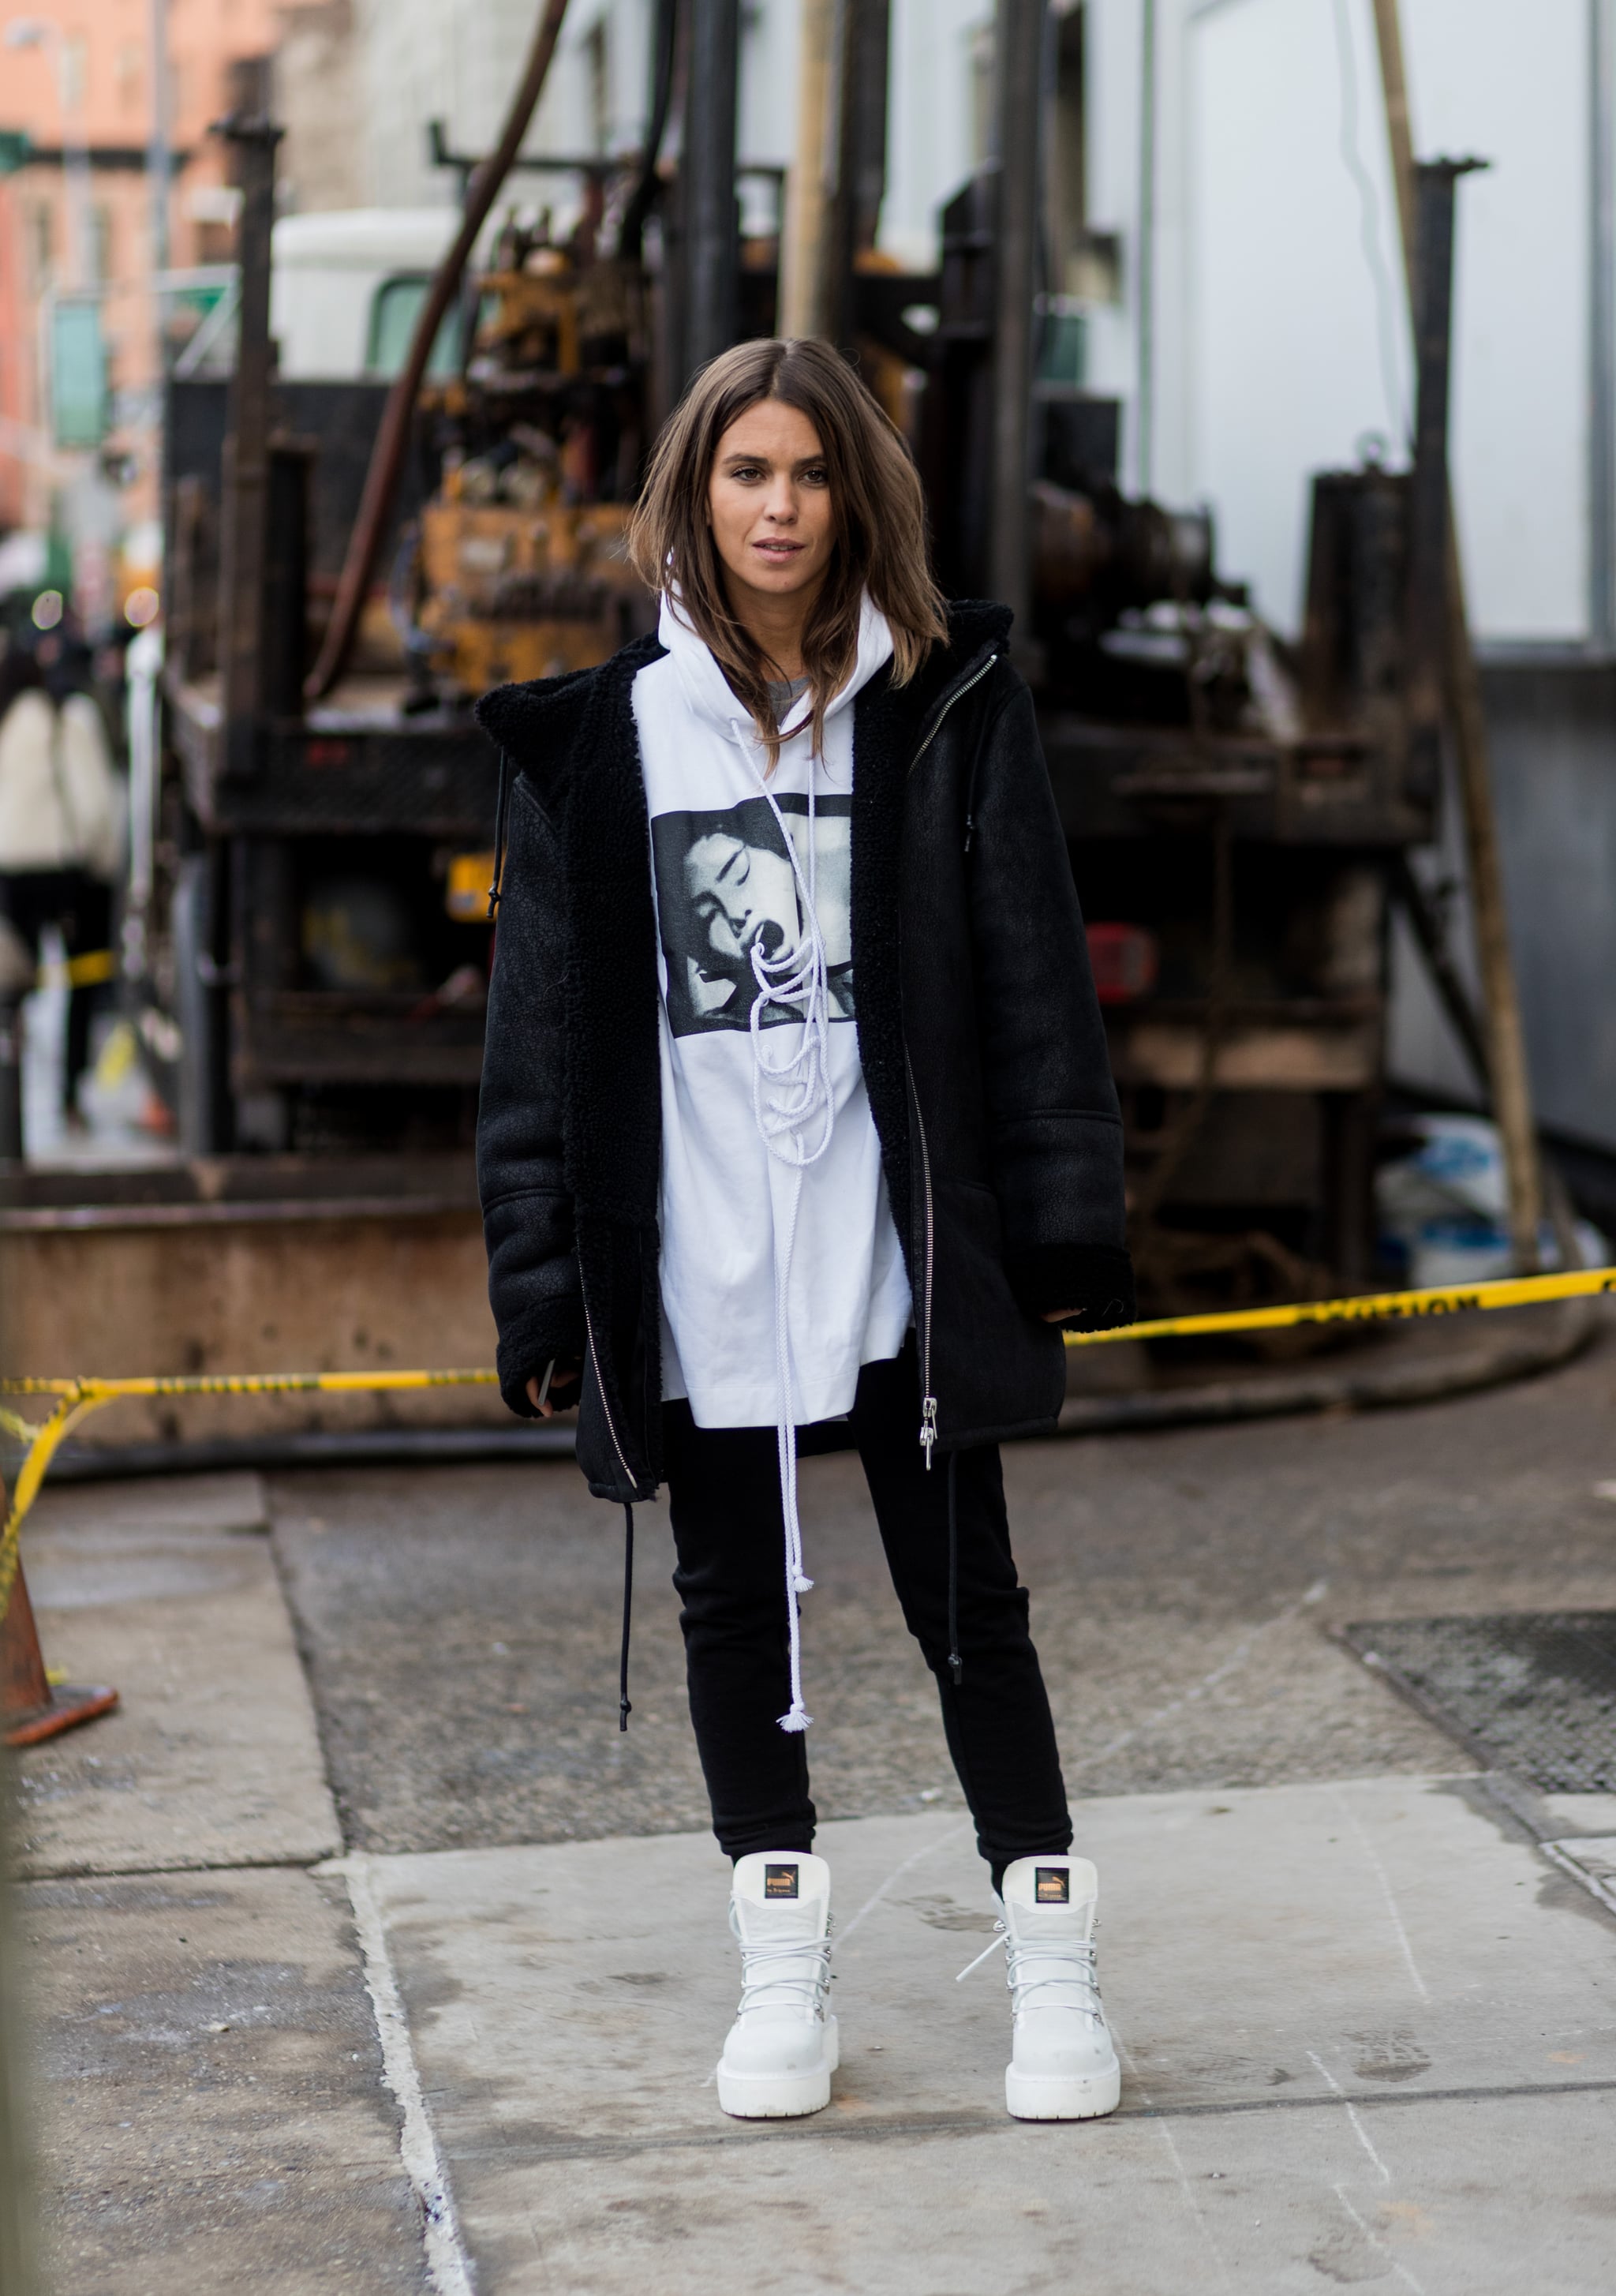 Oversize outfit стиль